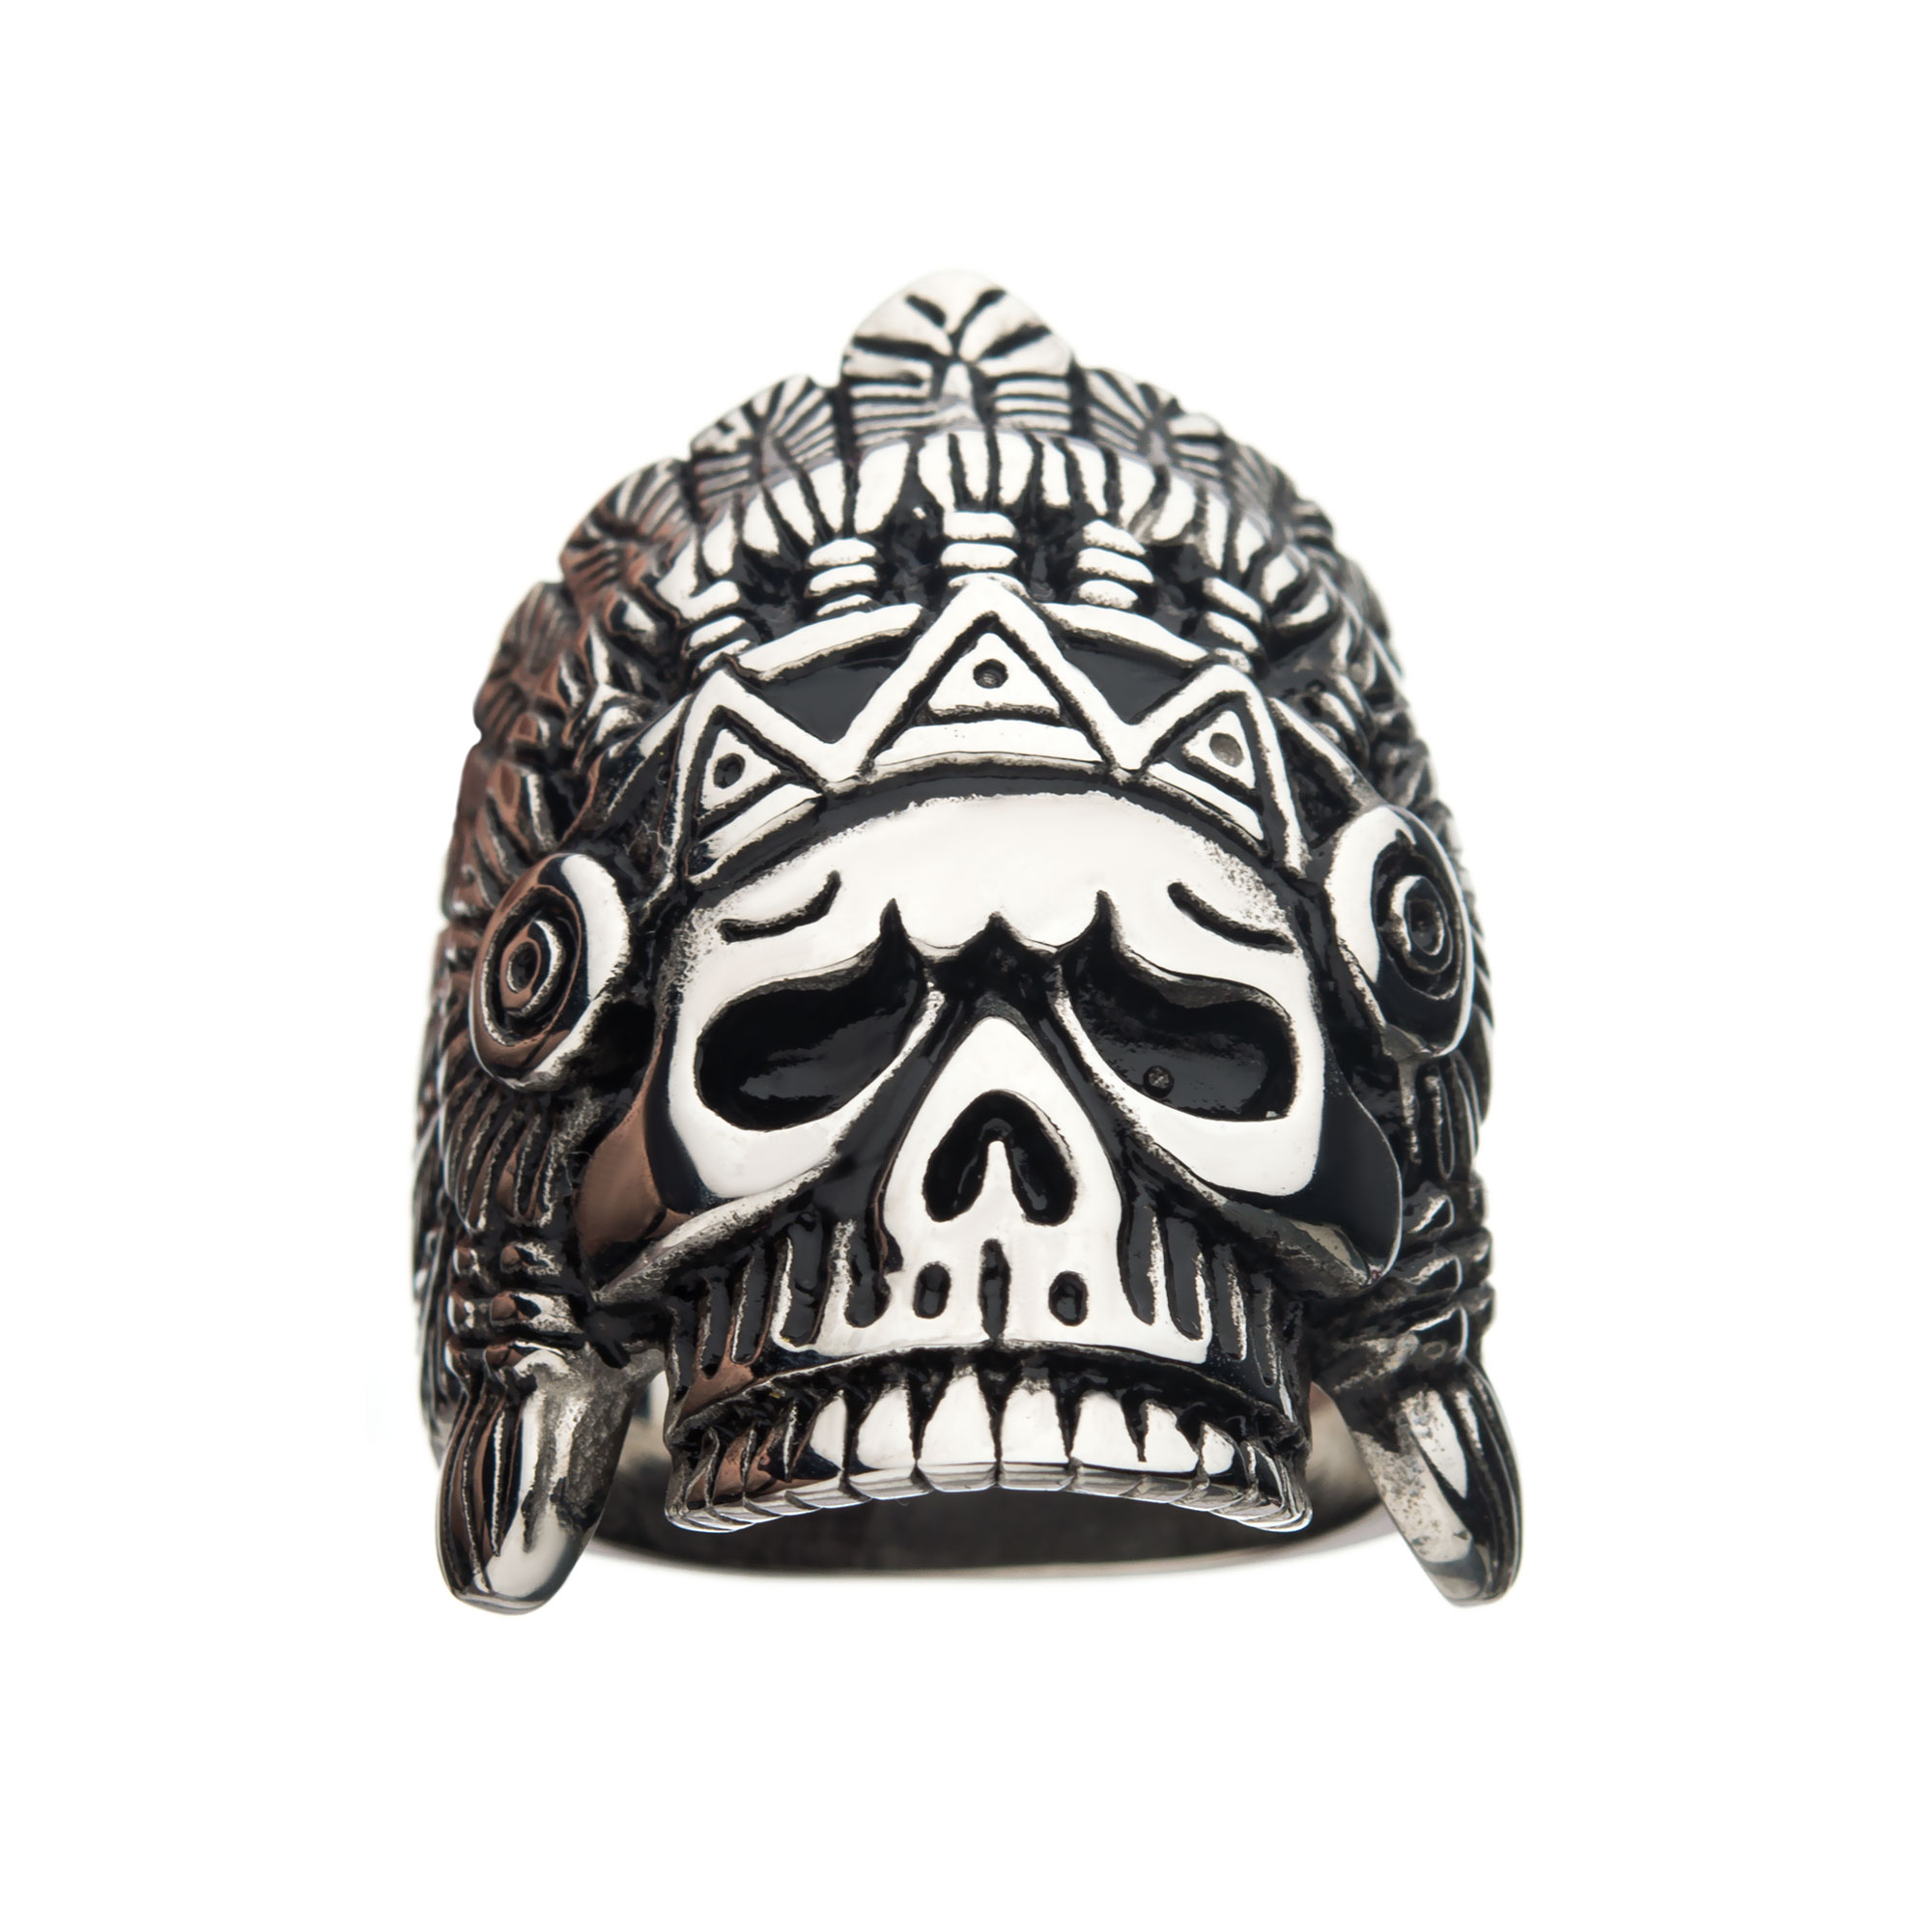 Oxidized Stainless Steel Chief Skull Ring Image 2 Morin Jewelers Southbridge, MA